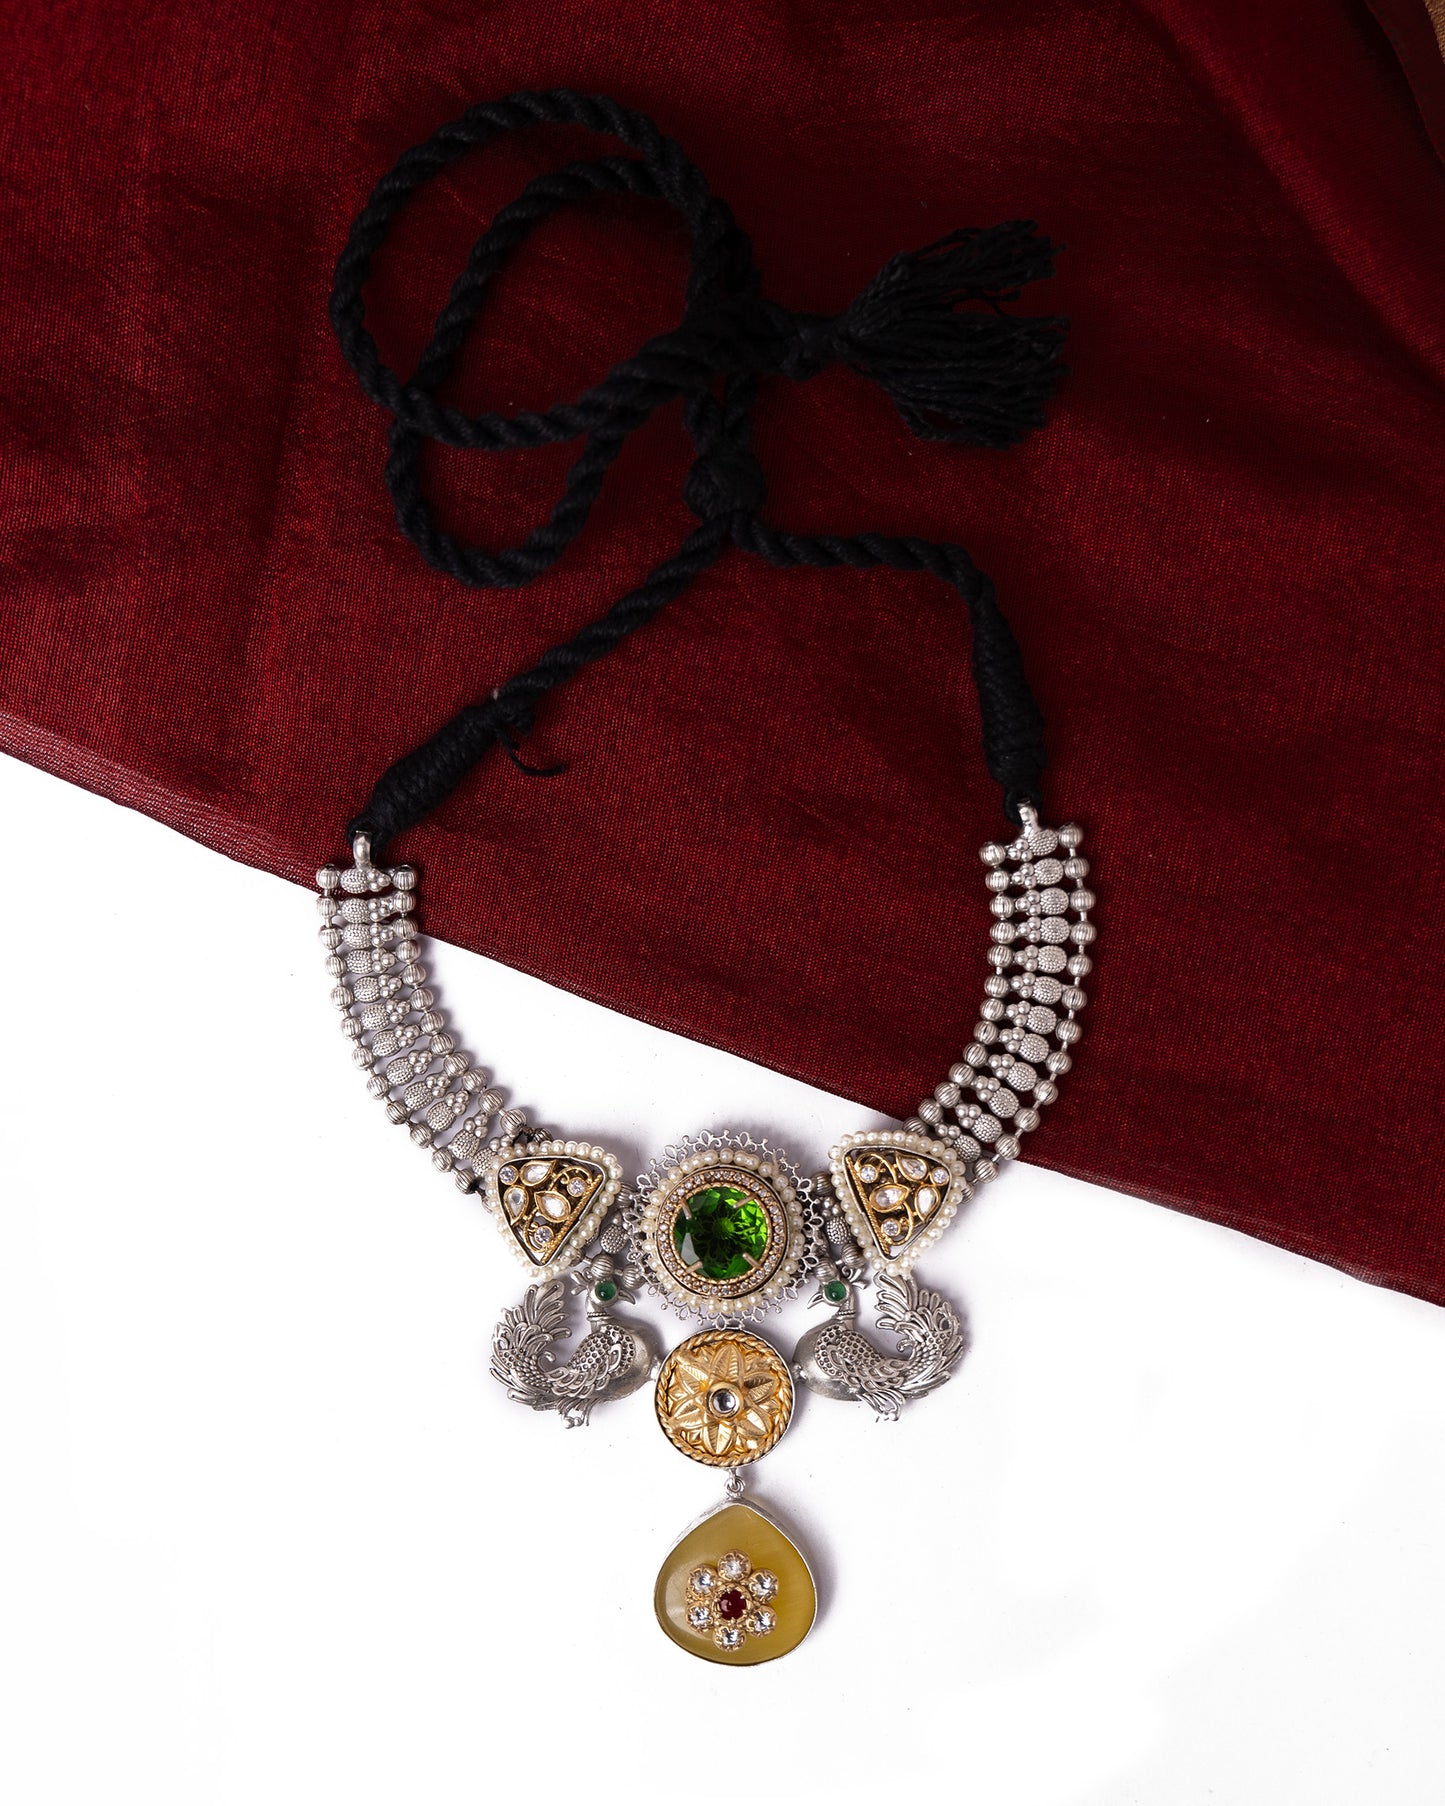 Choker with stones and peacock motifs